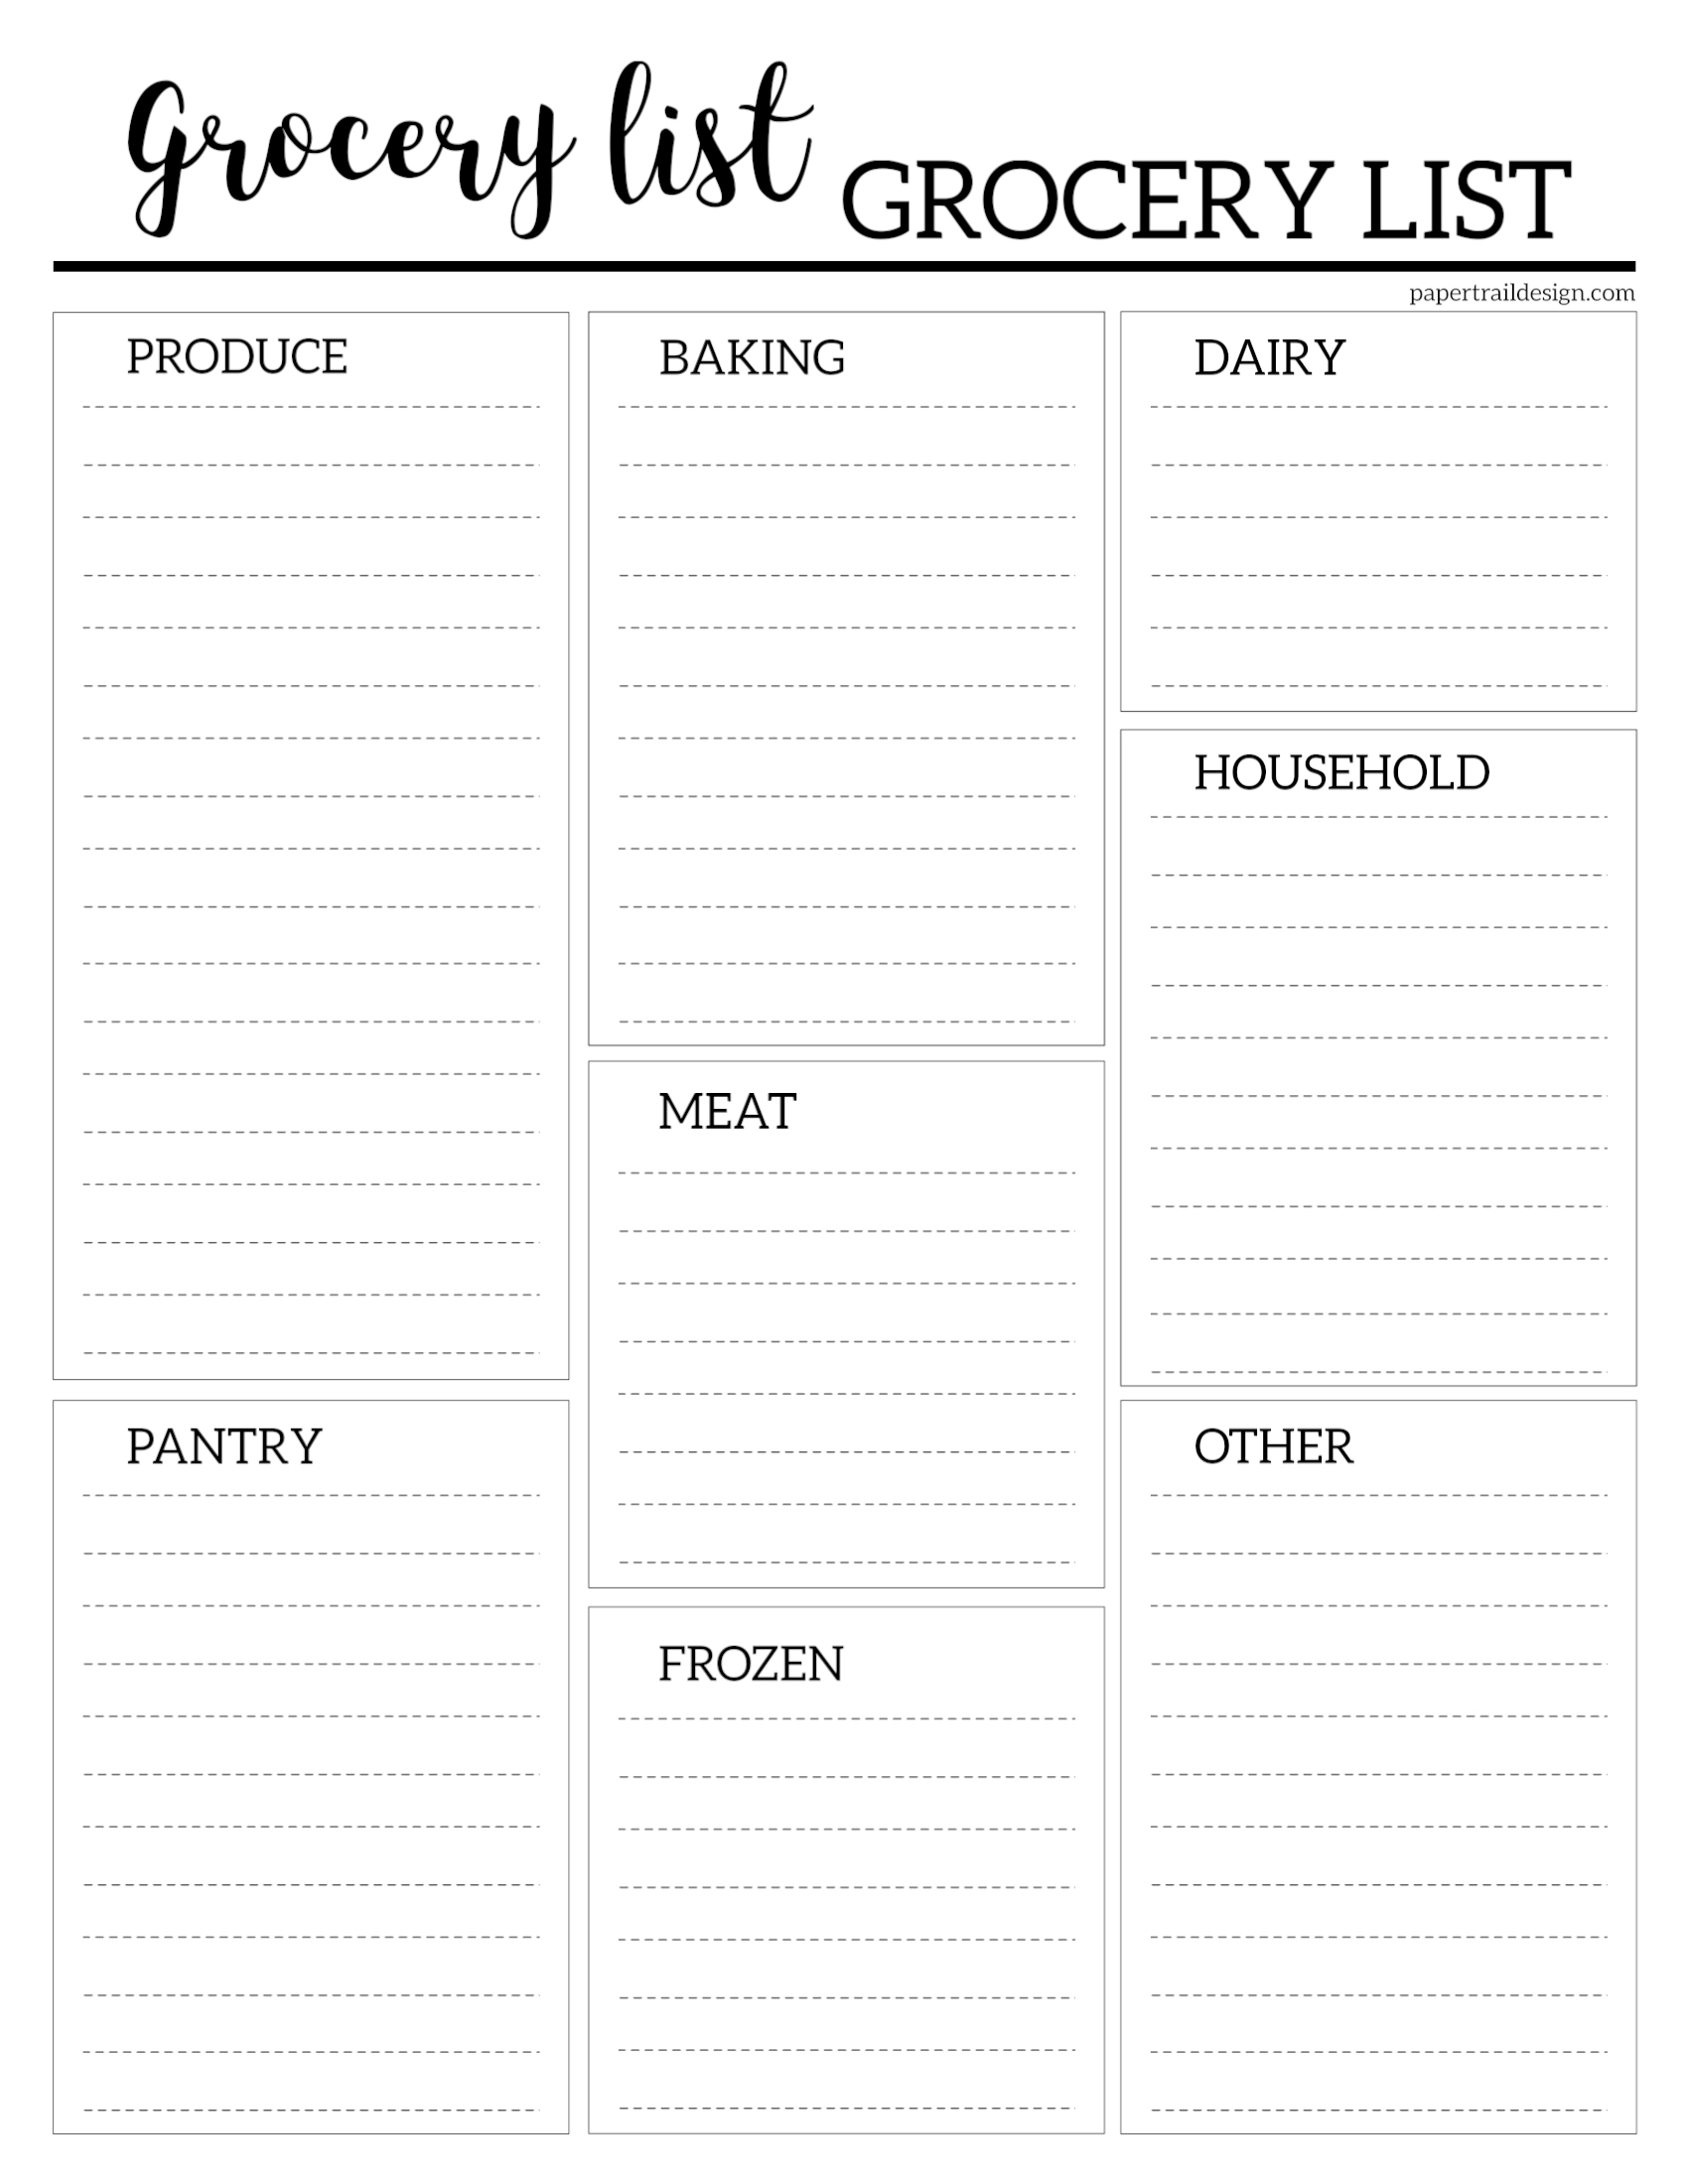 Free Grocery List Printable - Paper Trail Design